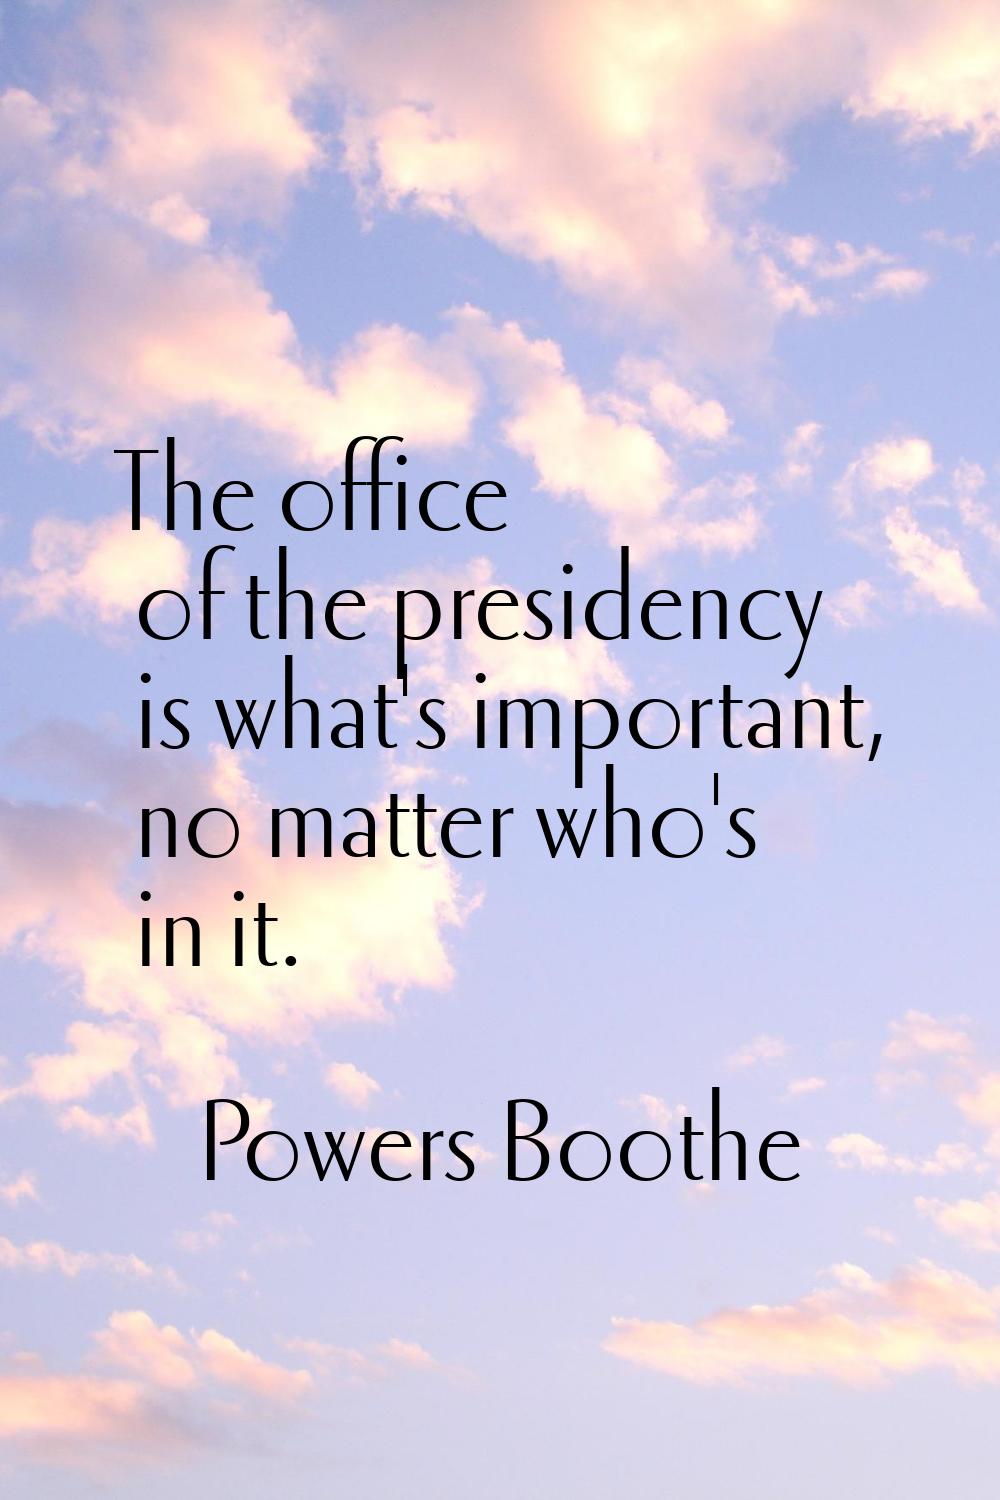 The office of the presidency is what's important, no matter who's in it.